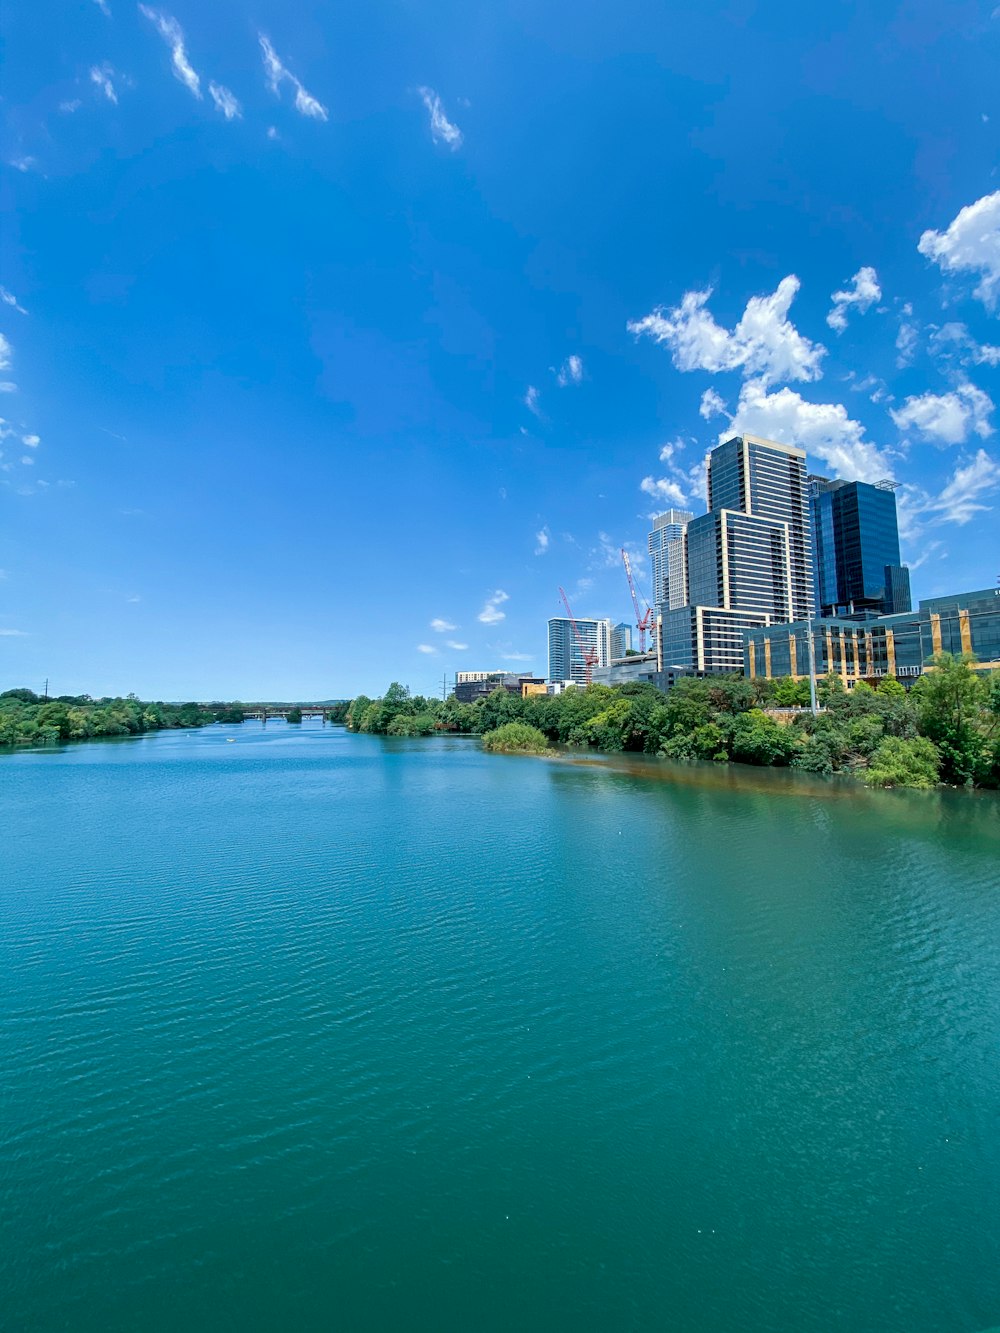 body of water near trees and buildings under blue sky during daytime